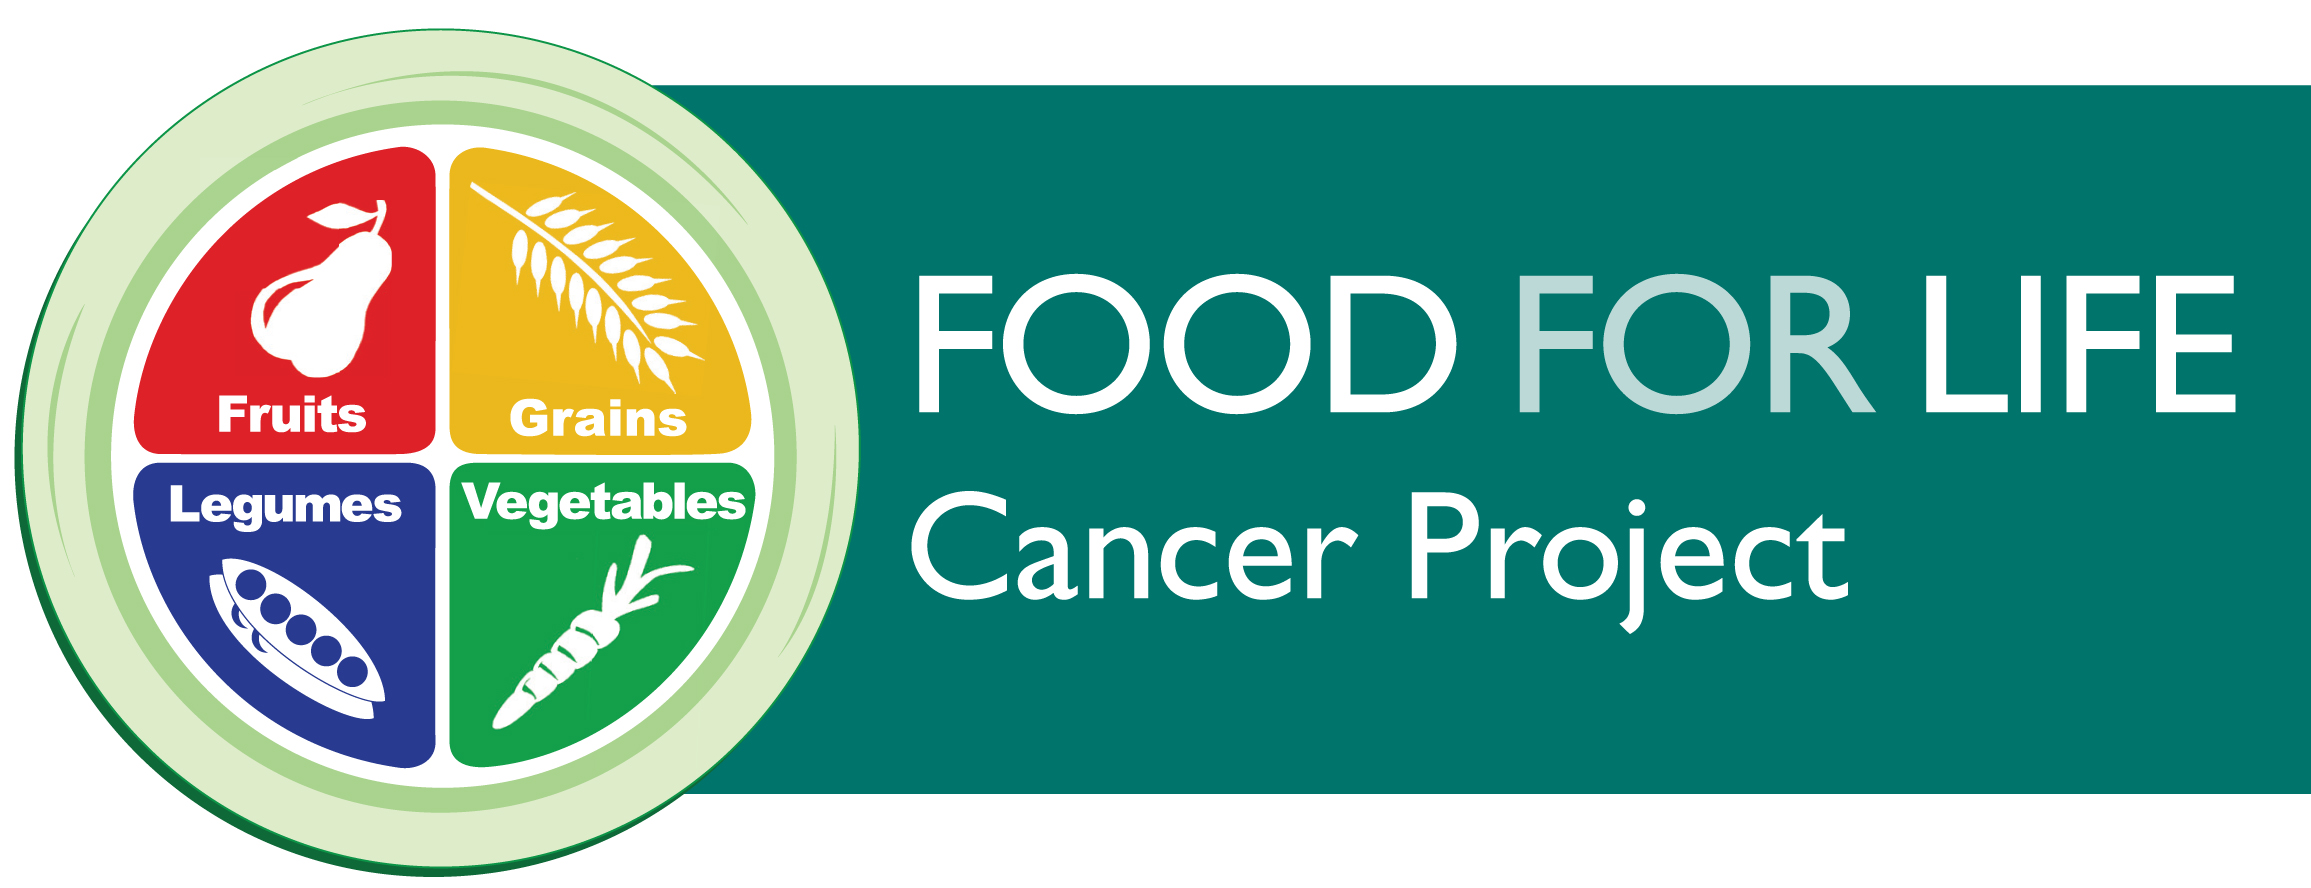 Food for Life Cancer Project logo